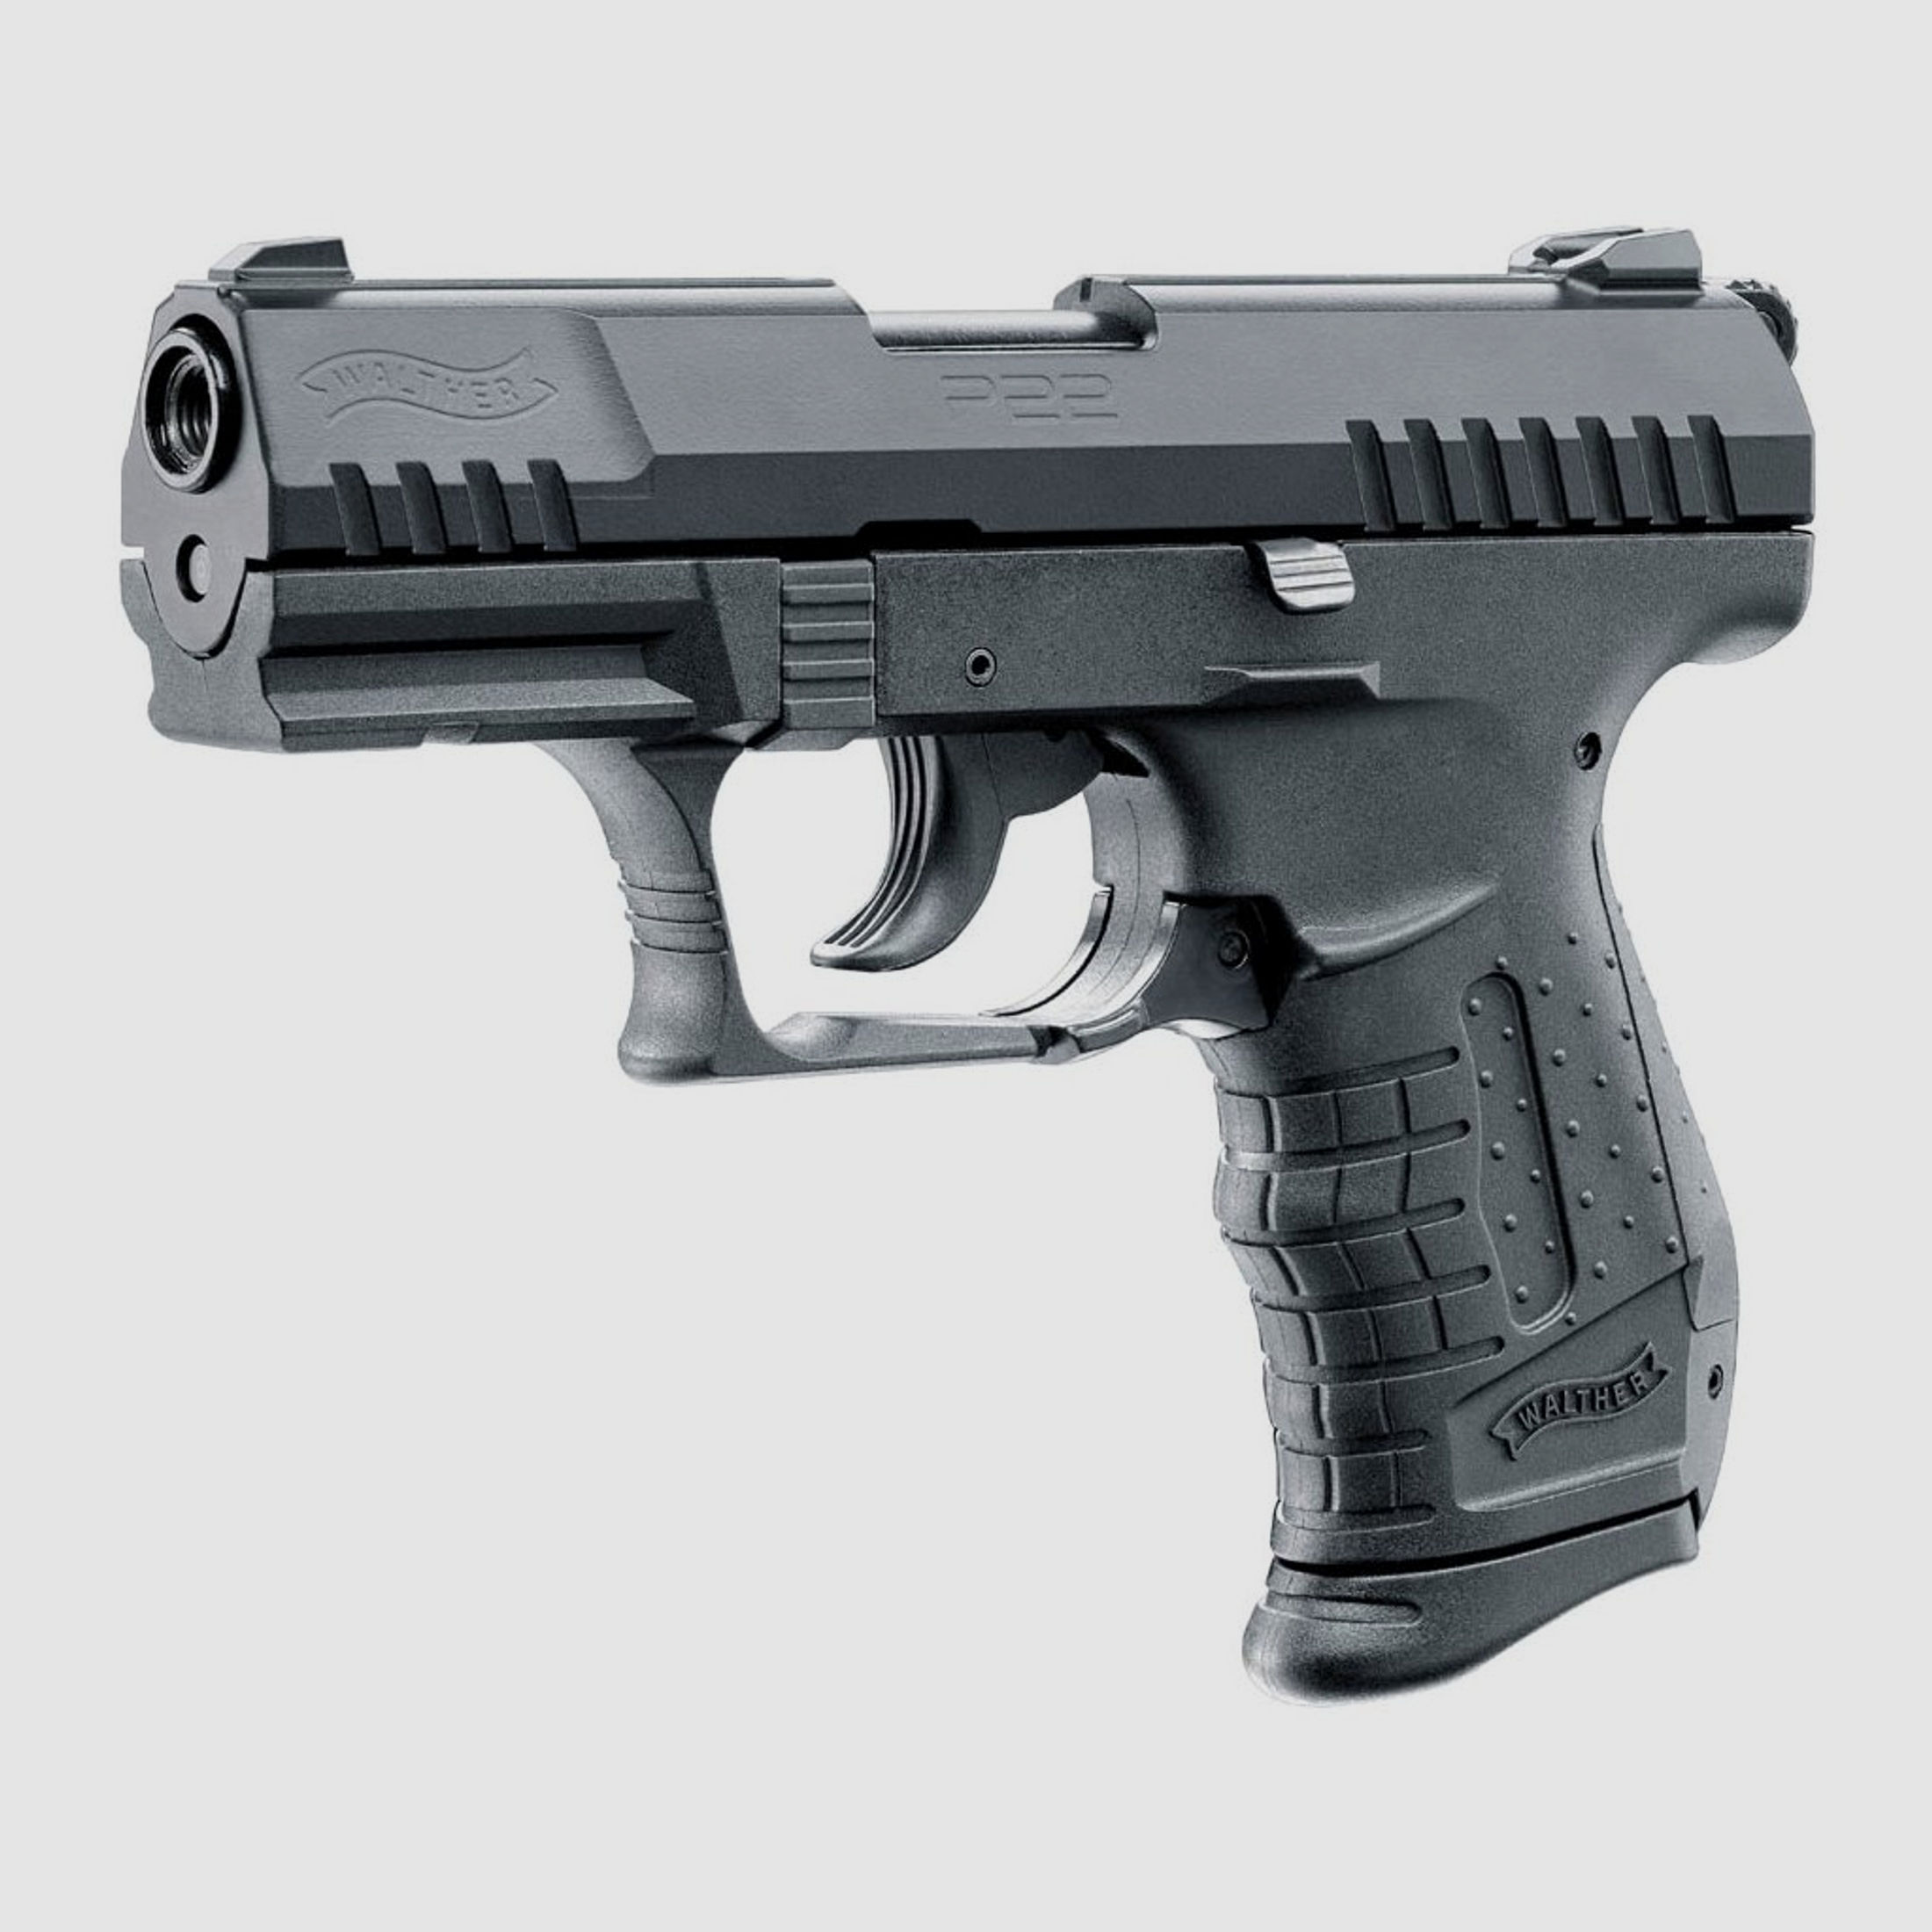 Walther P22 Ready BLK